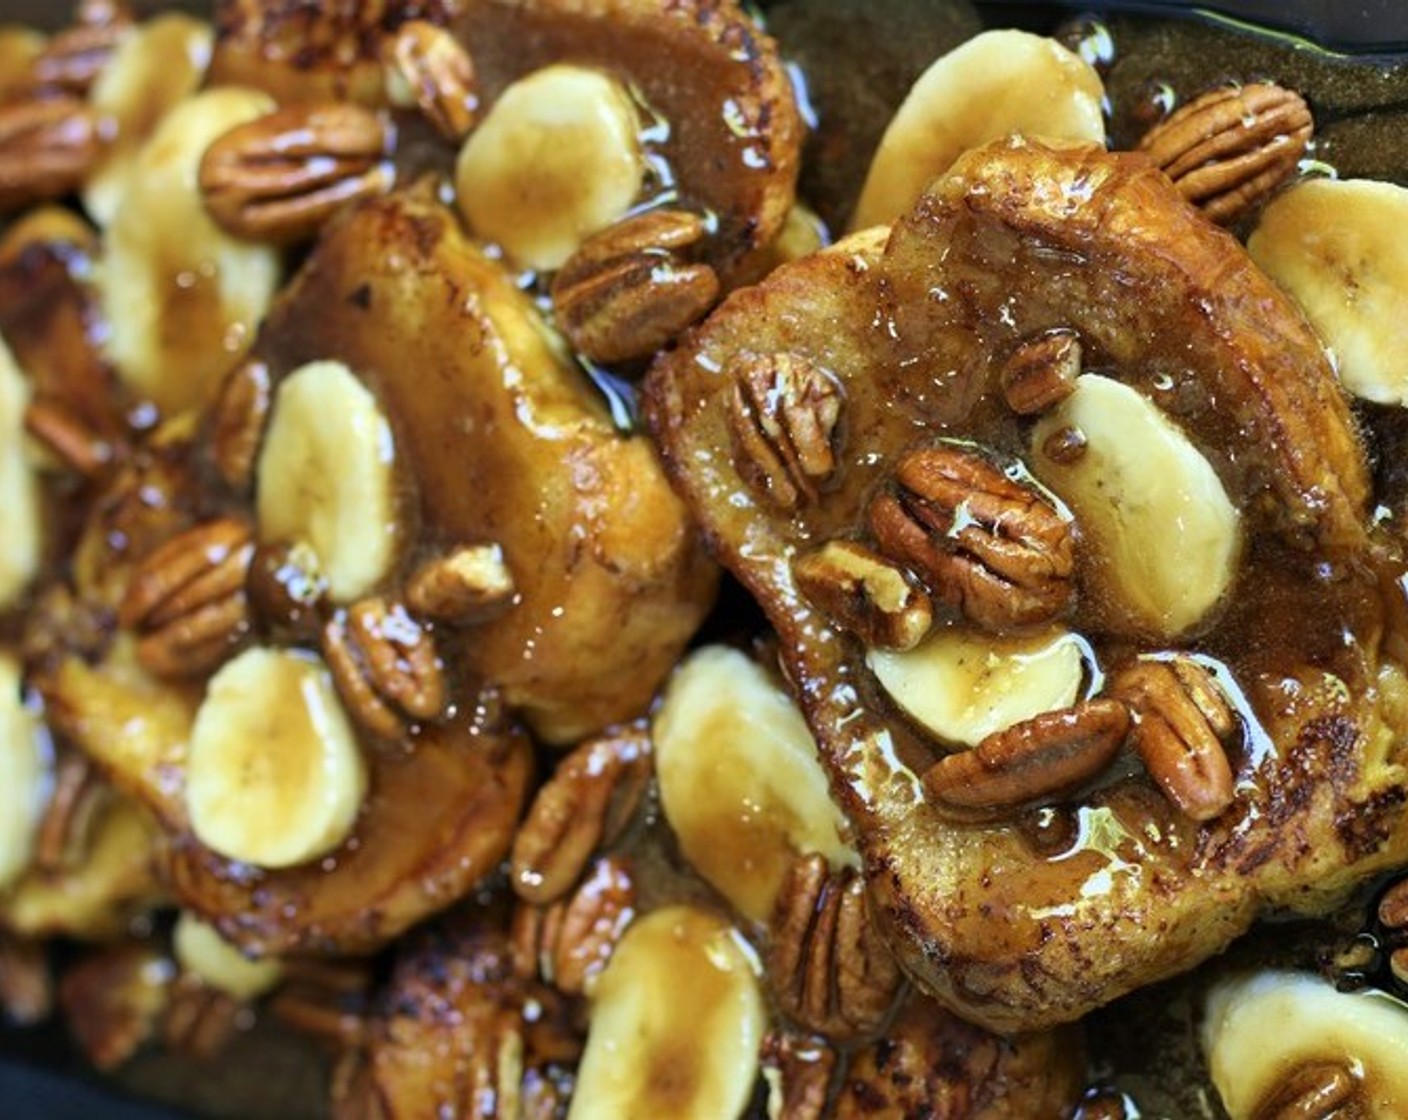 step 13 Remove warm French Toast from the oven and place it on a platter. Pour Bananas Foster Sauce on top and serve immediately! Optionally, serve with sweetened whipped cream or vanilla ice cream, or additional sliced bananas and pecans.